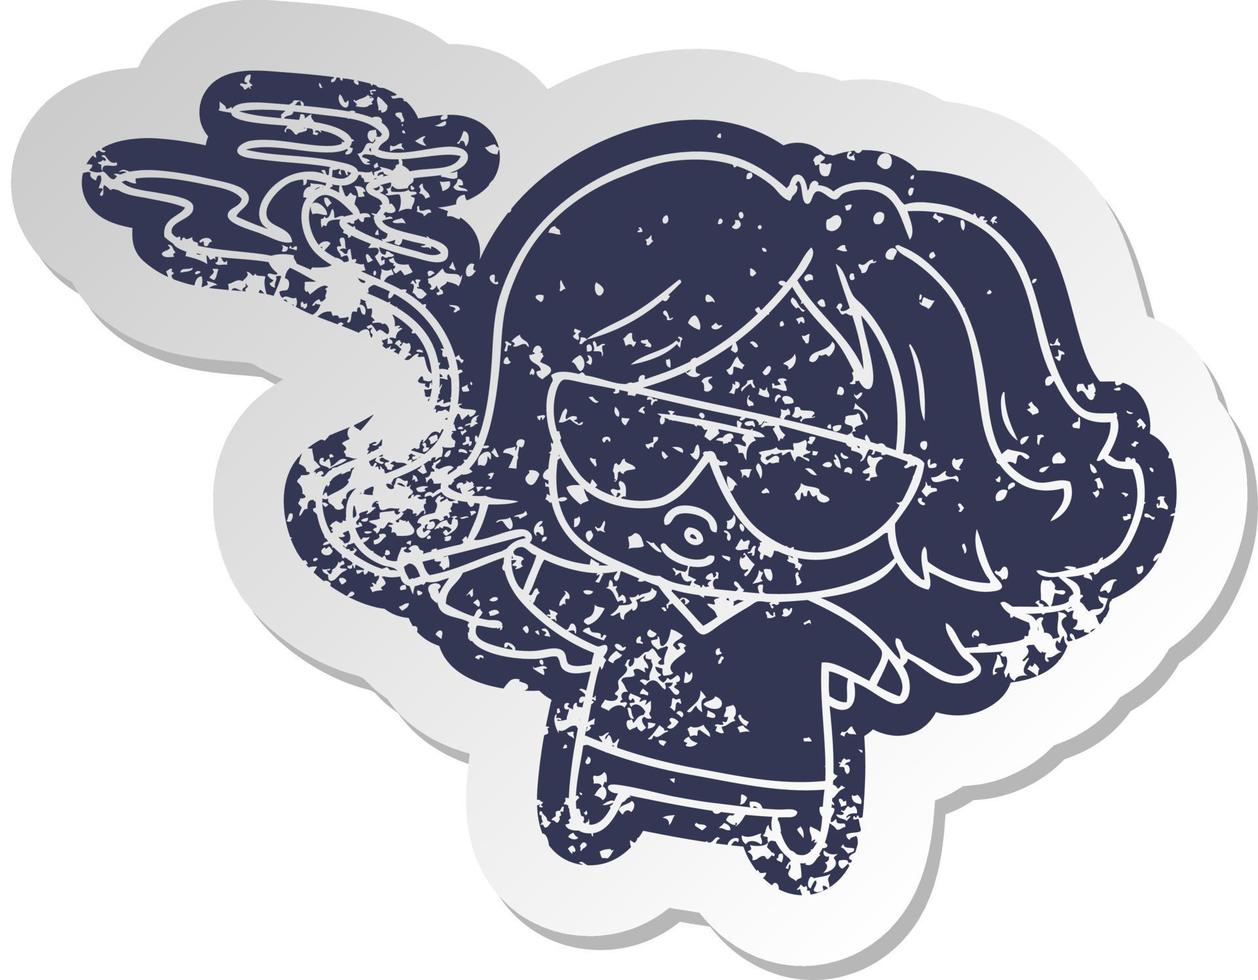 distressed old sticker cute kawaii smoking a joint vector